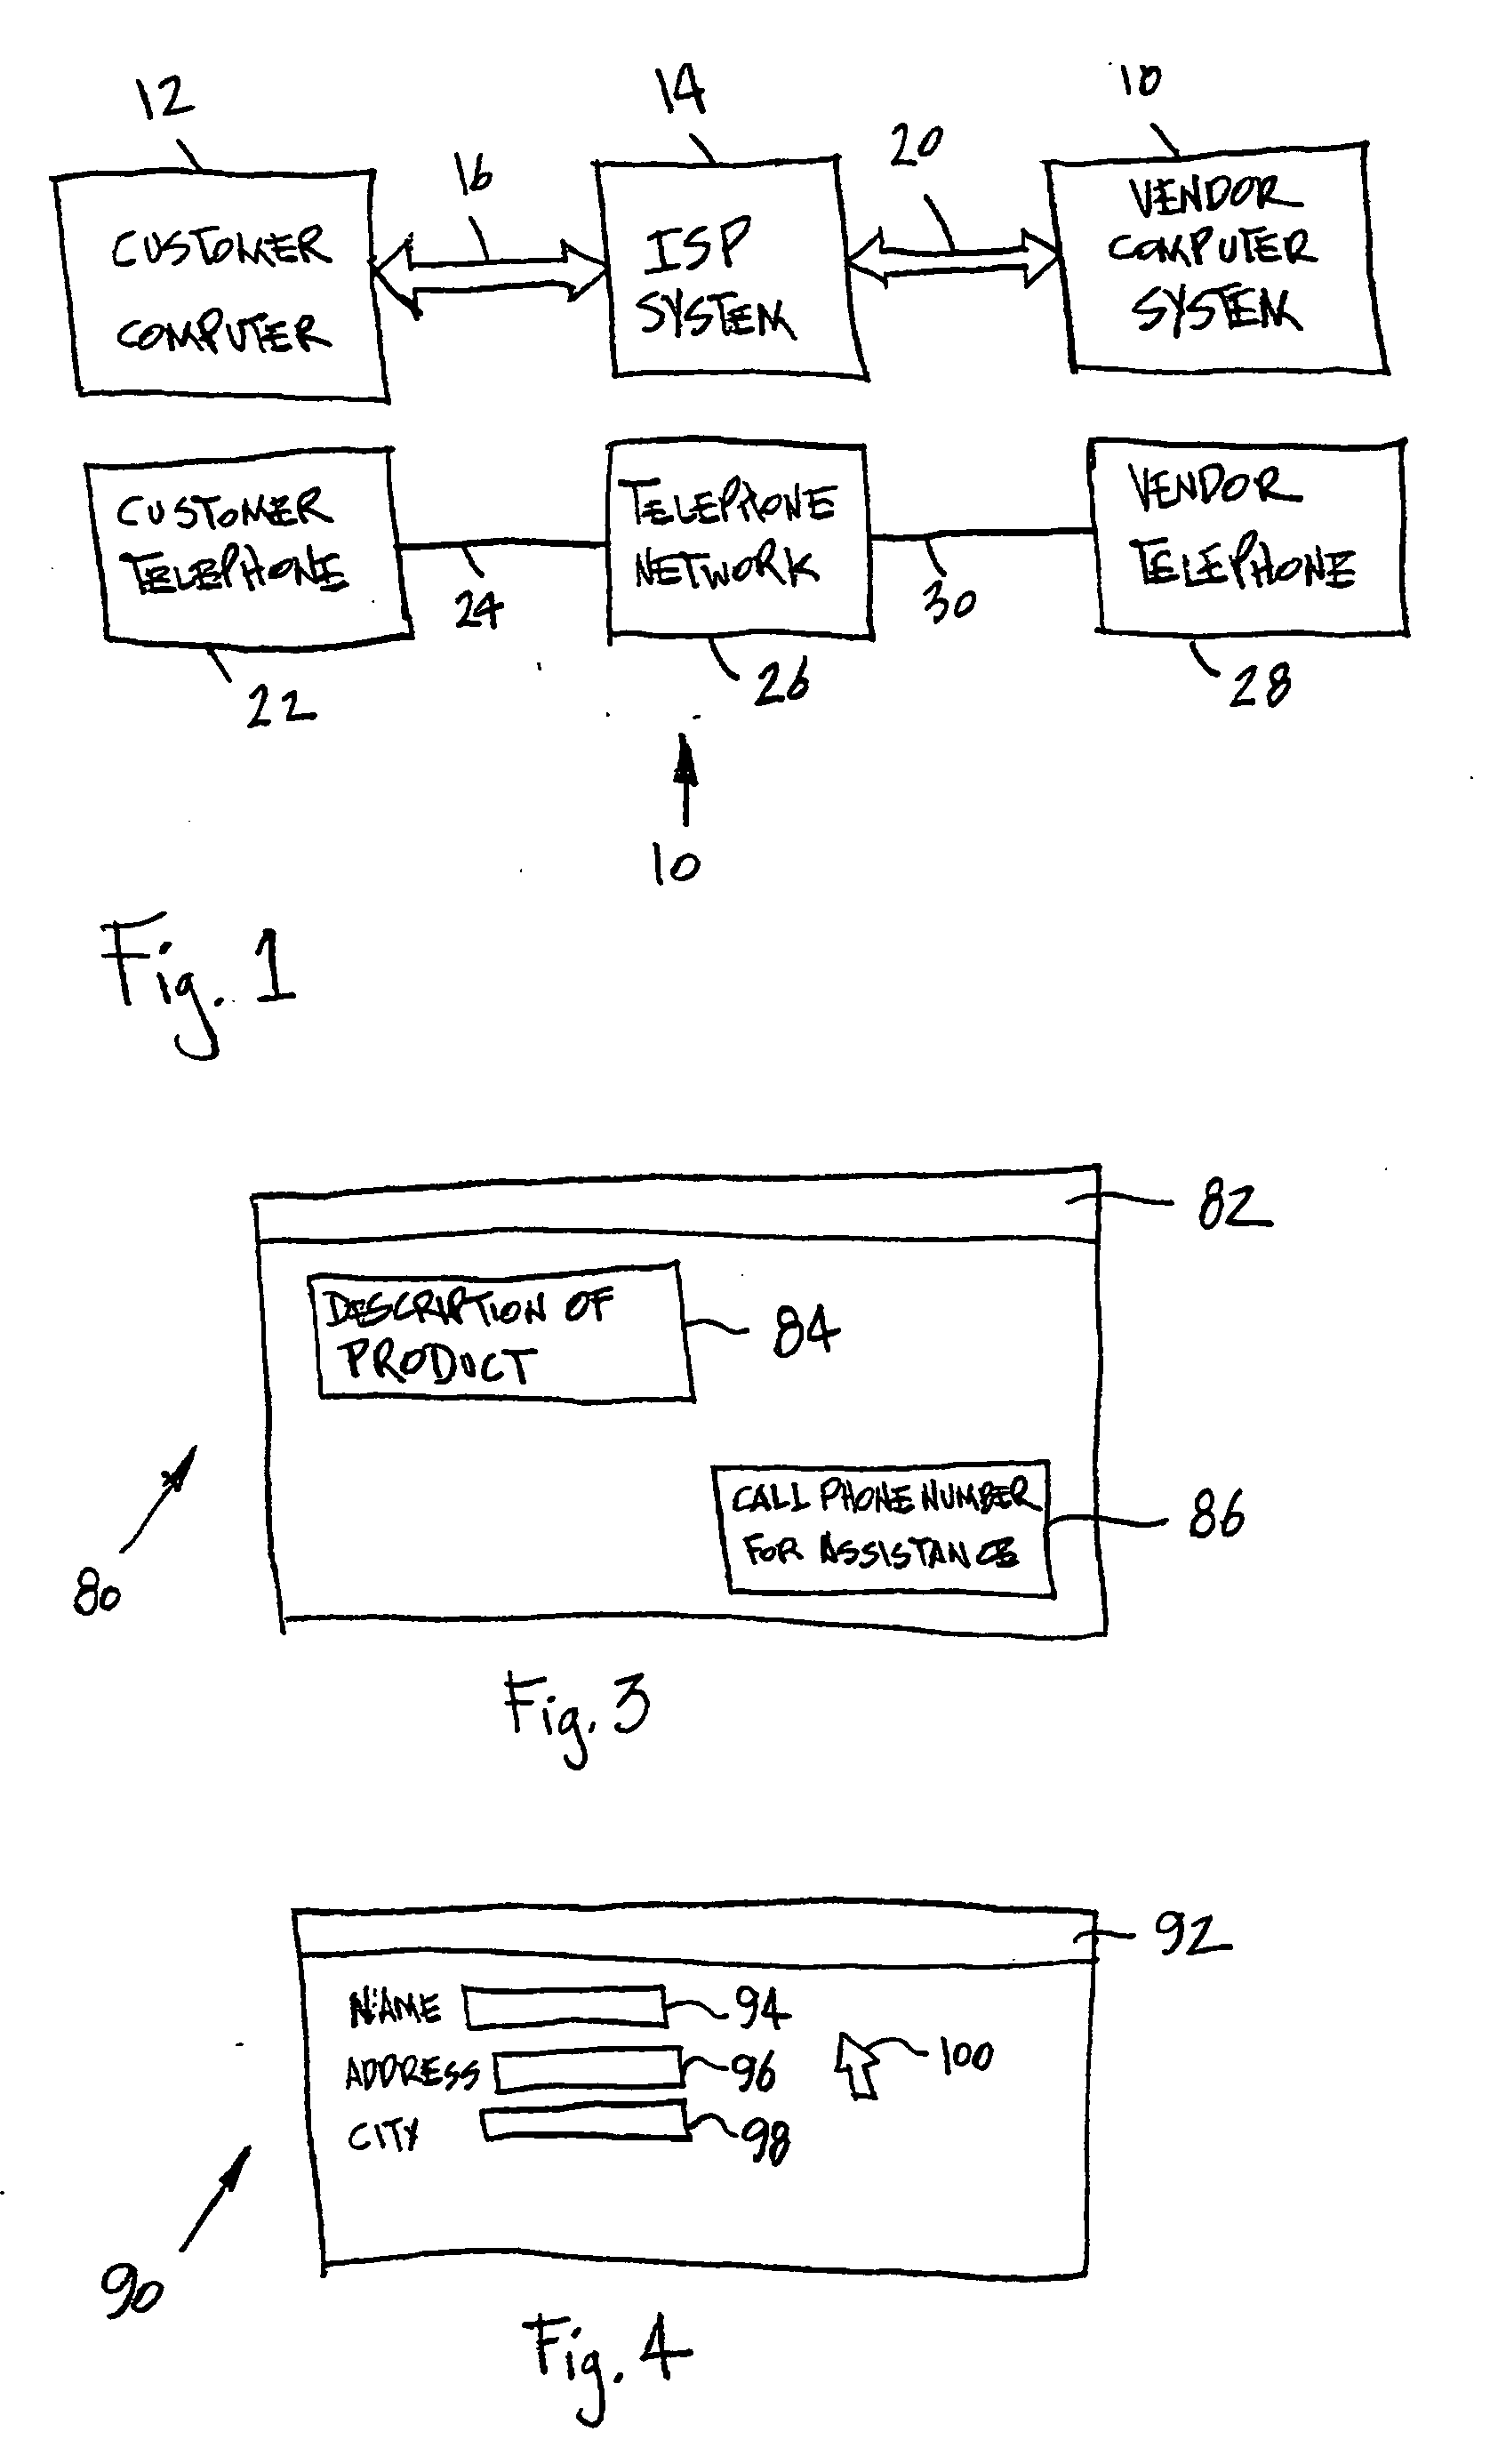 System and method for marketing products and services